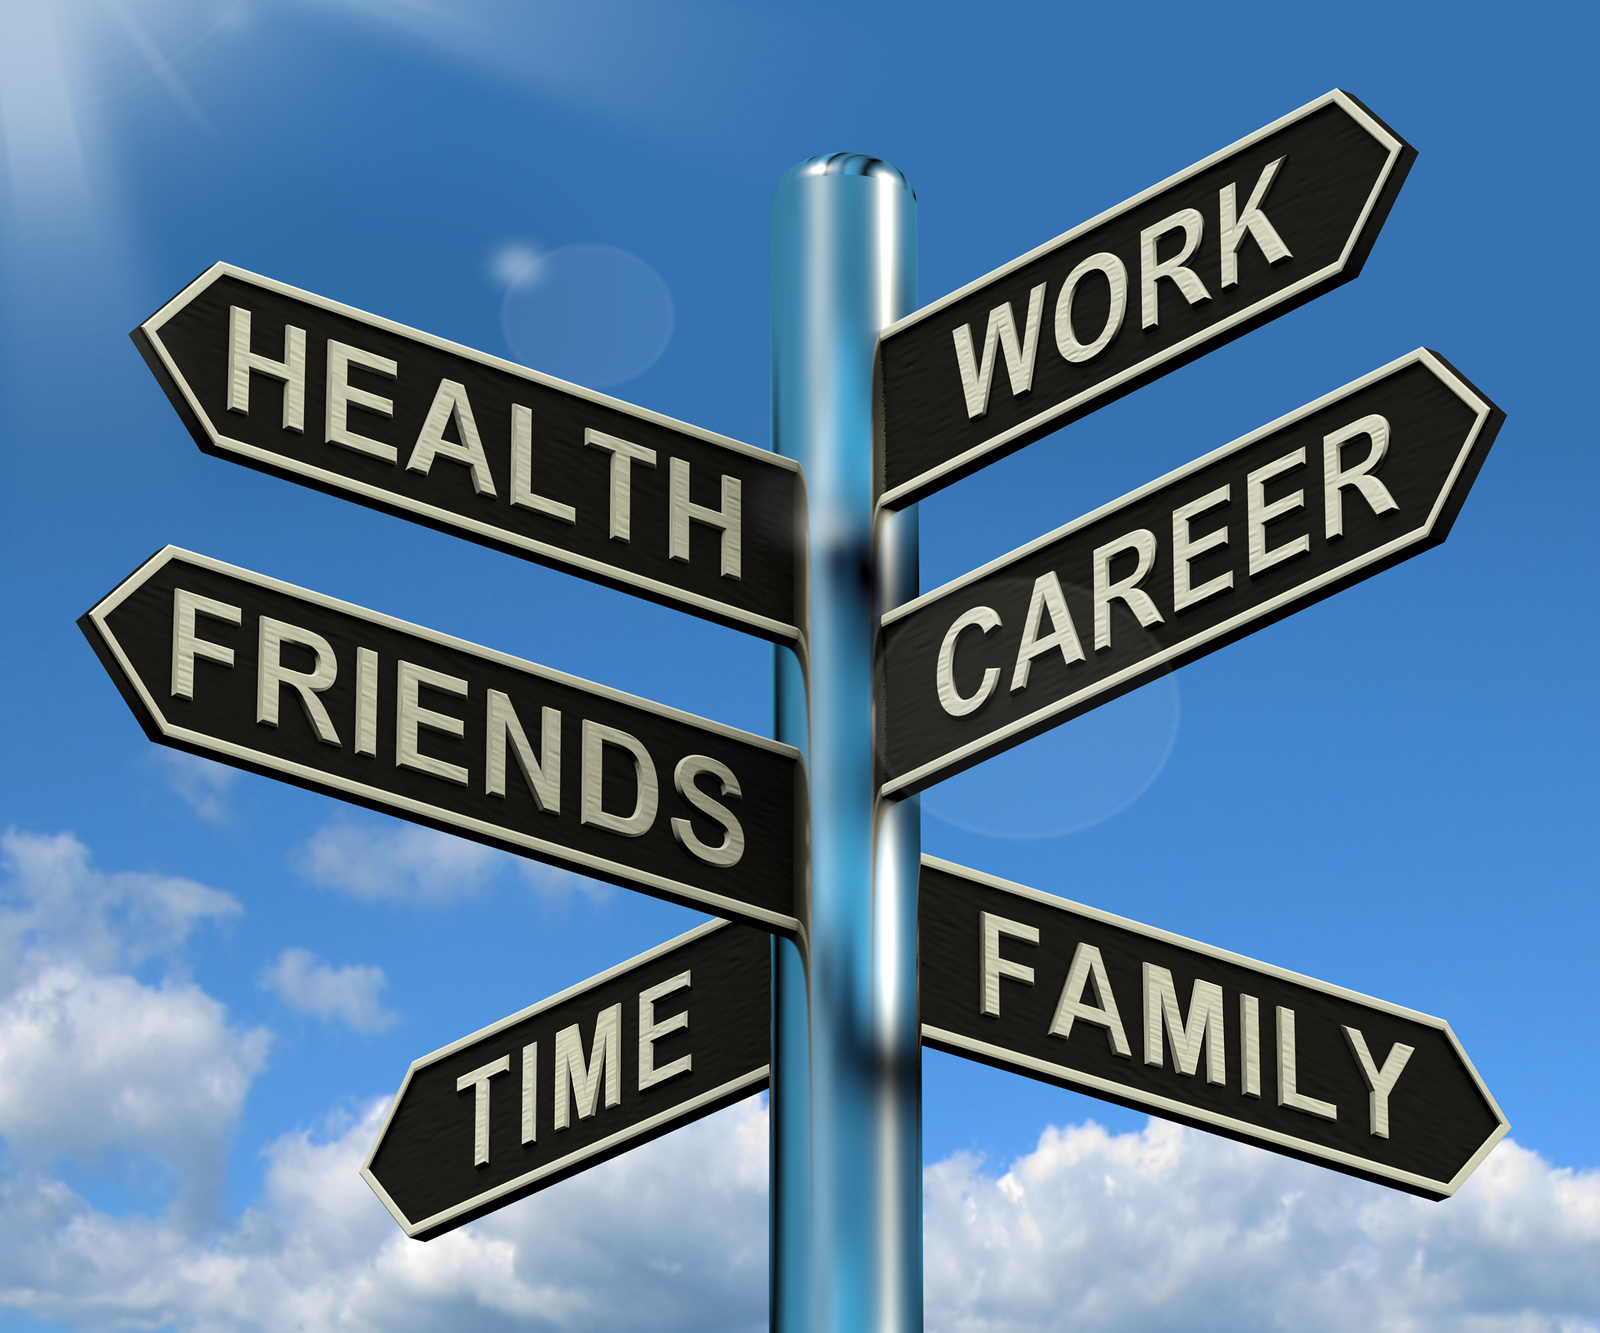 Health Work Career Friends Signpost Shows Life And Lifestyle Balance